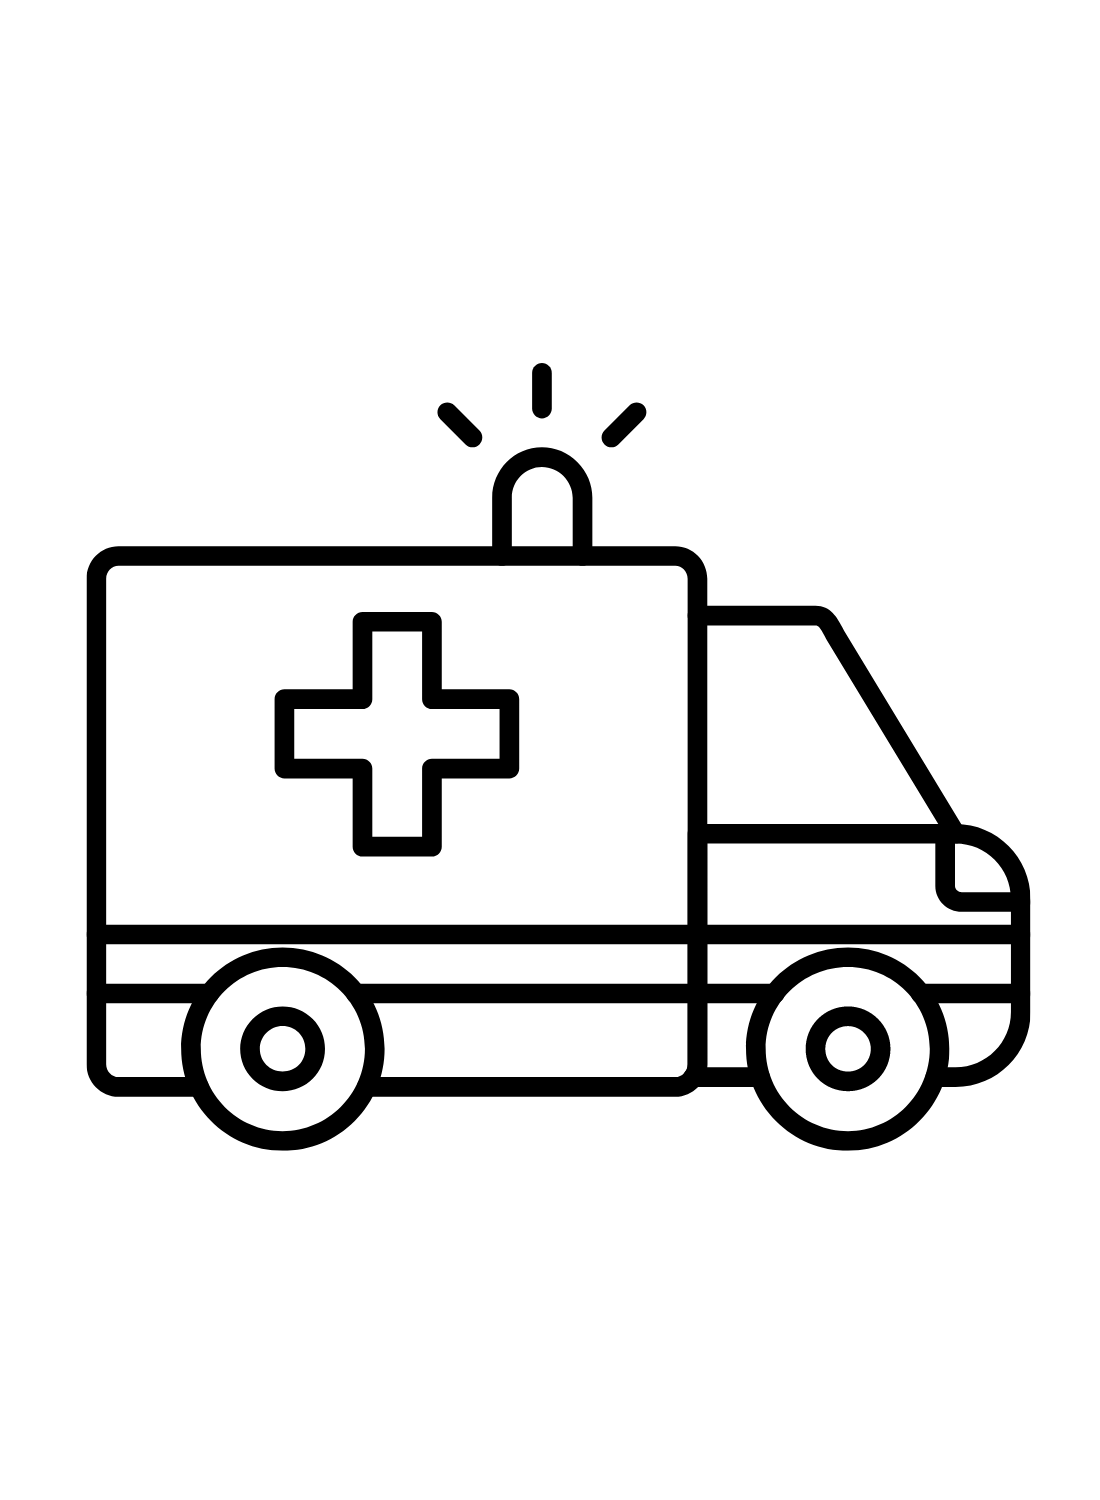 Drawing Ambulance Coloring Pages